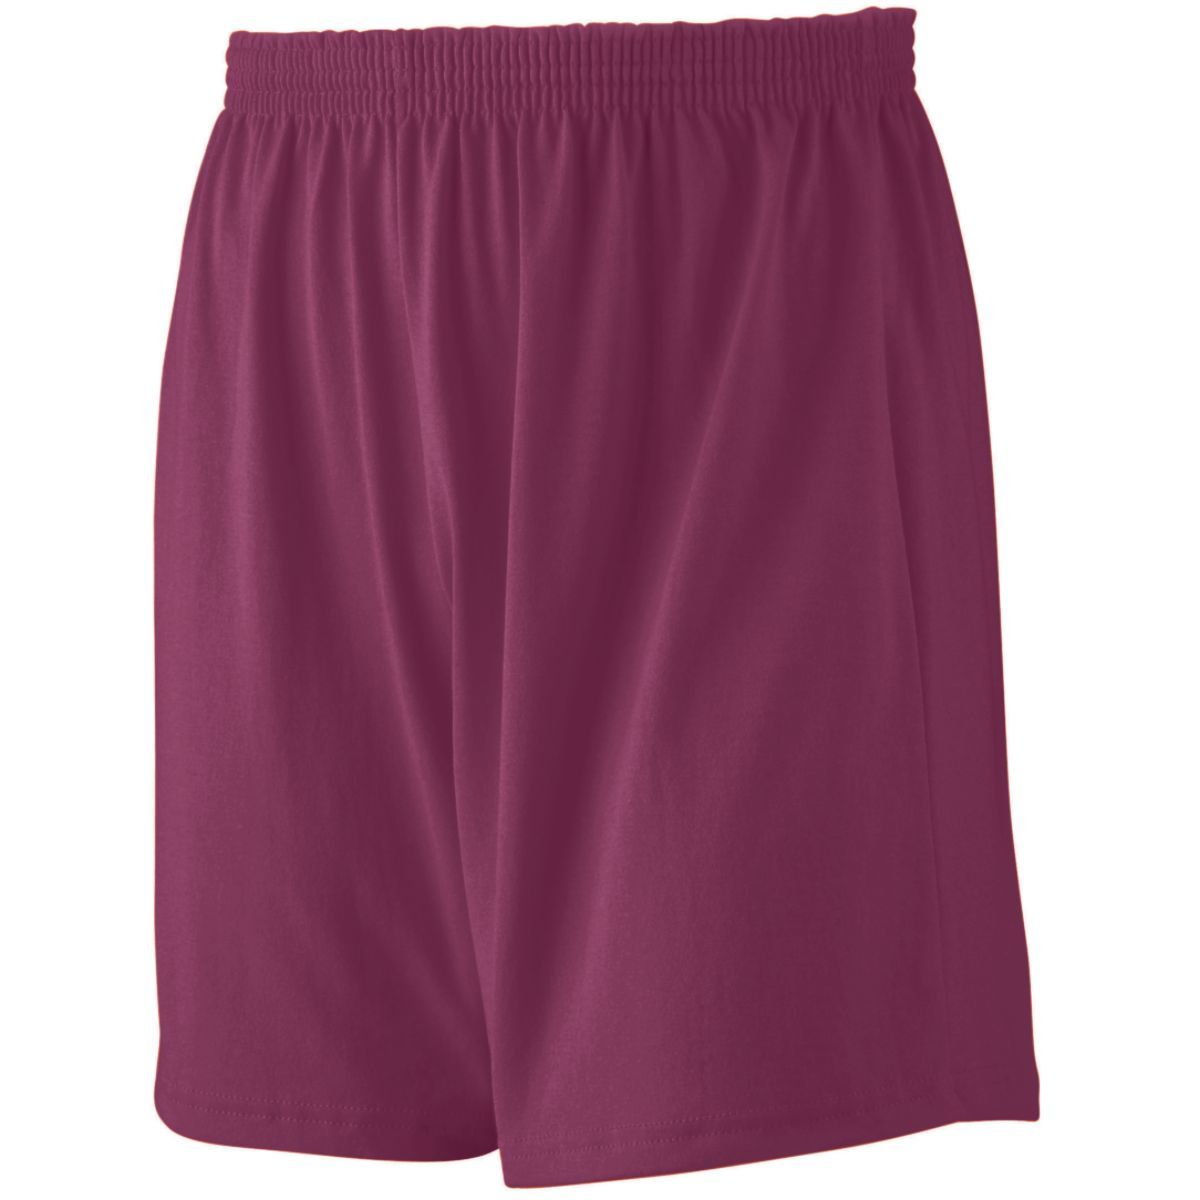 Augusta Sportswear Youth Jersey Knit Shorts in Maroon  -Part of the Youth, Youth-Shorts, Augusta-Products product lines at KanaleyCreations.com